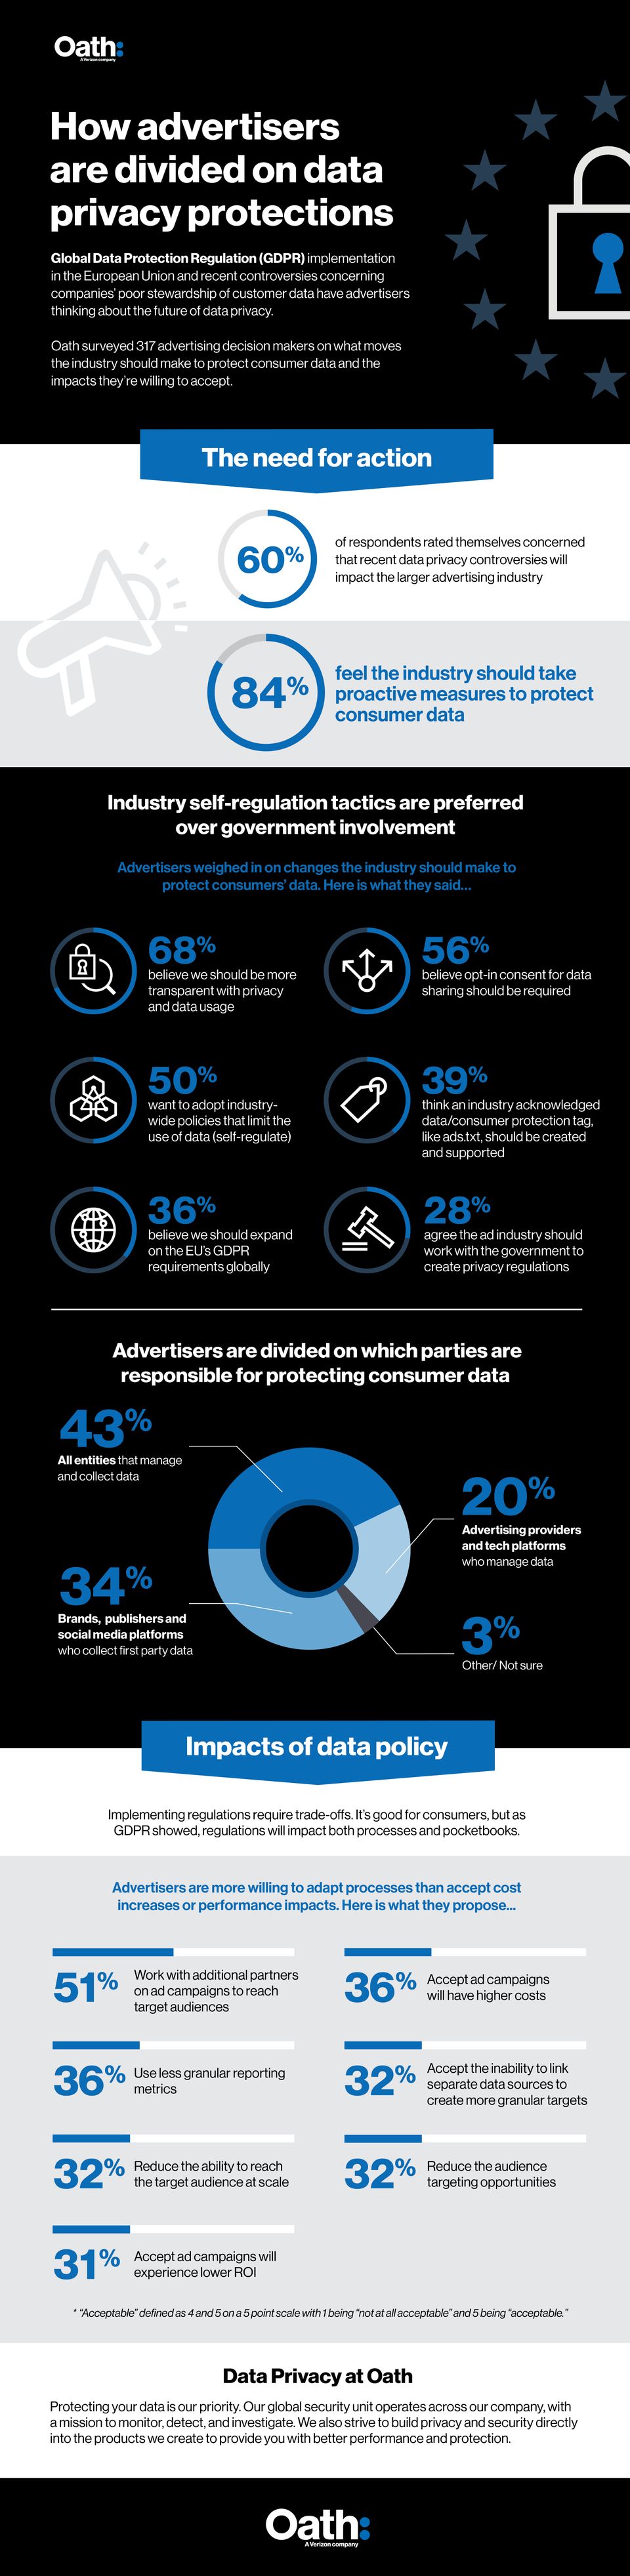 See what advertisers think about data privacy protections